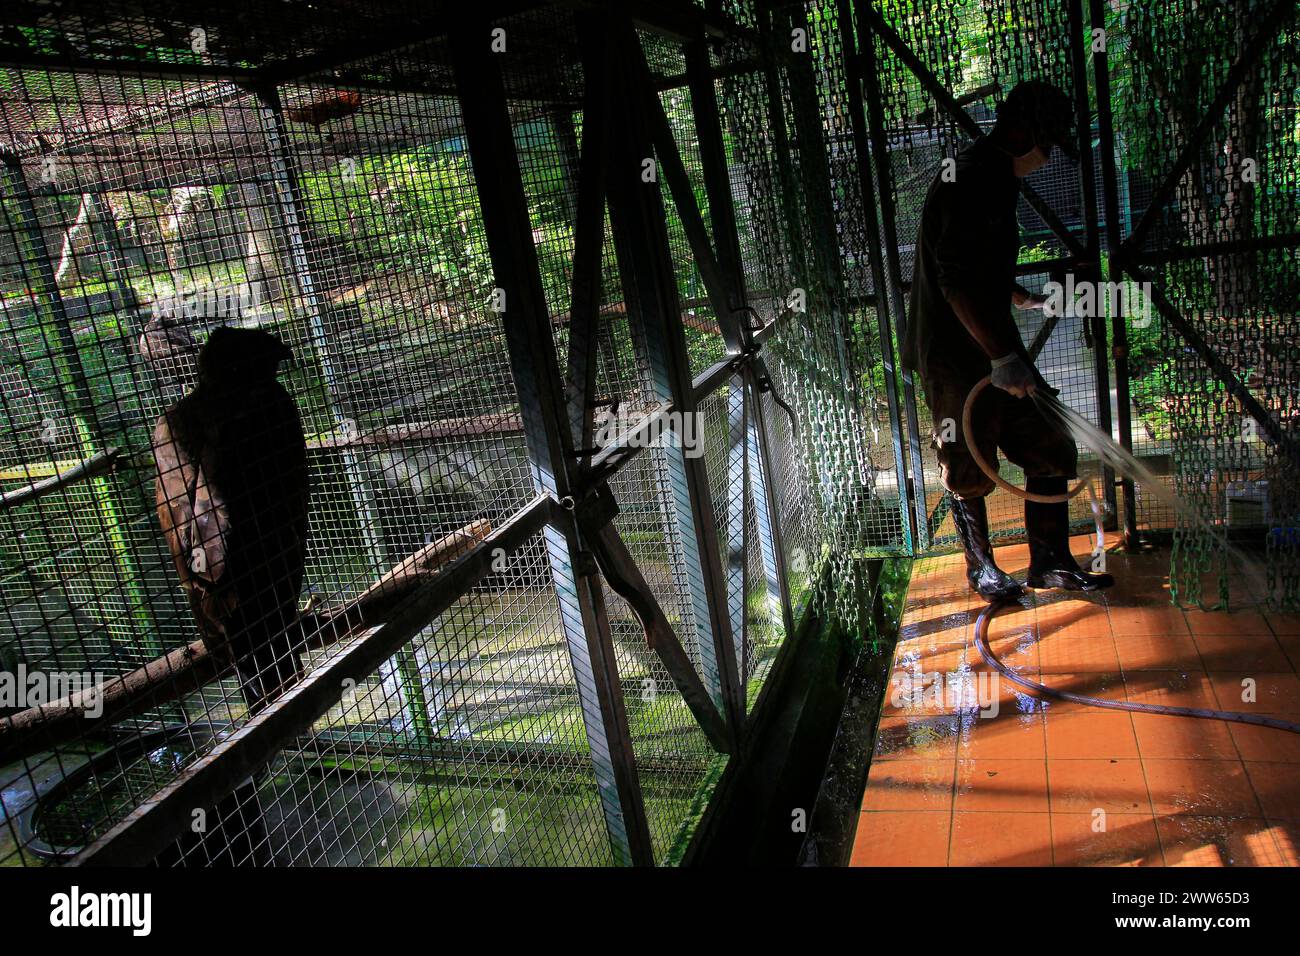 Animal keepers carry out routine cleaning cages in eagle enclosure area at Wildlife Rescue Center. Stock Photo